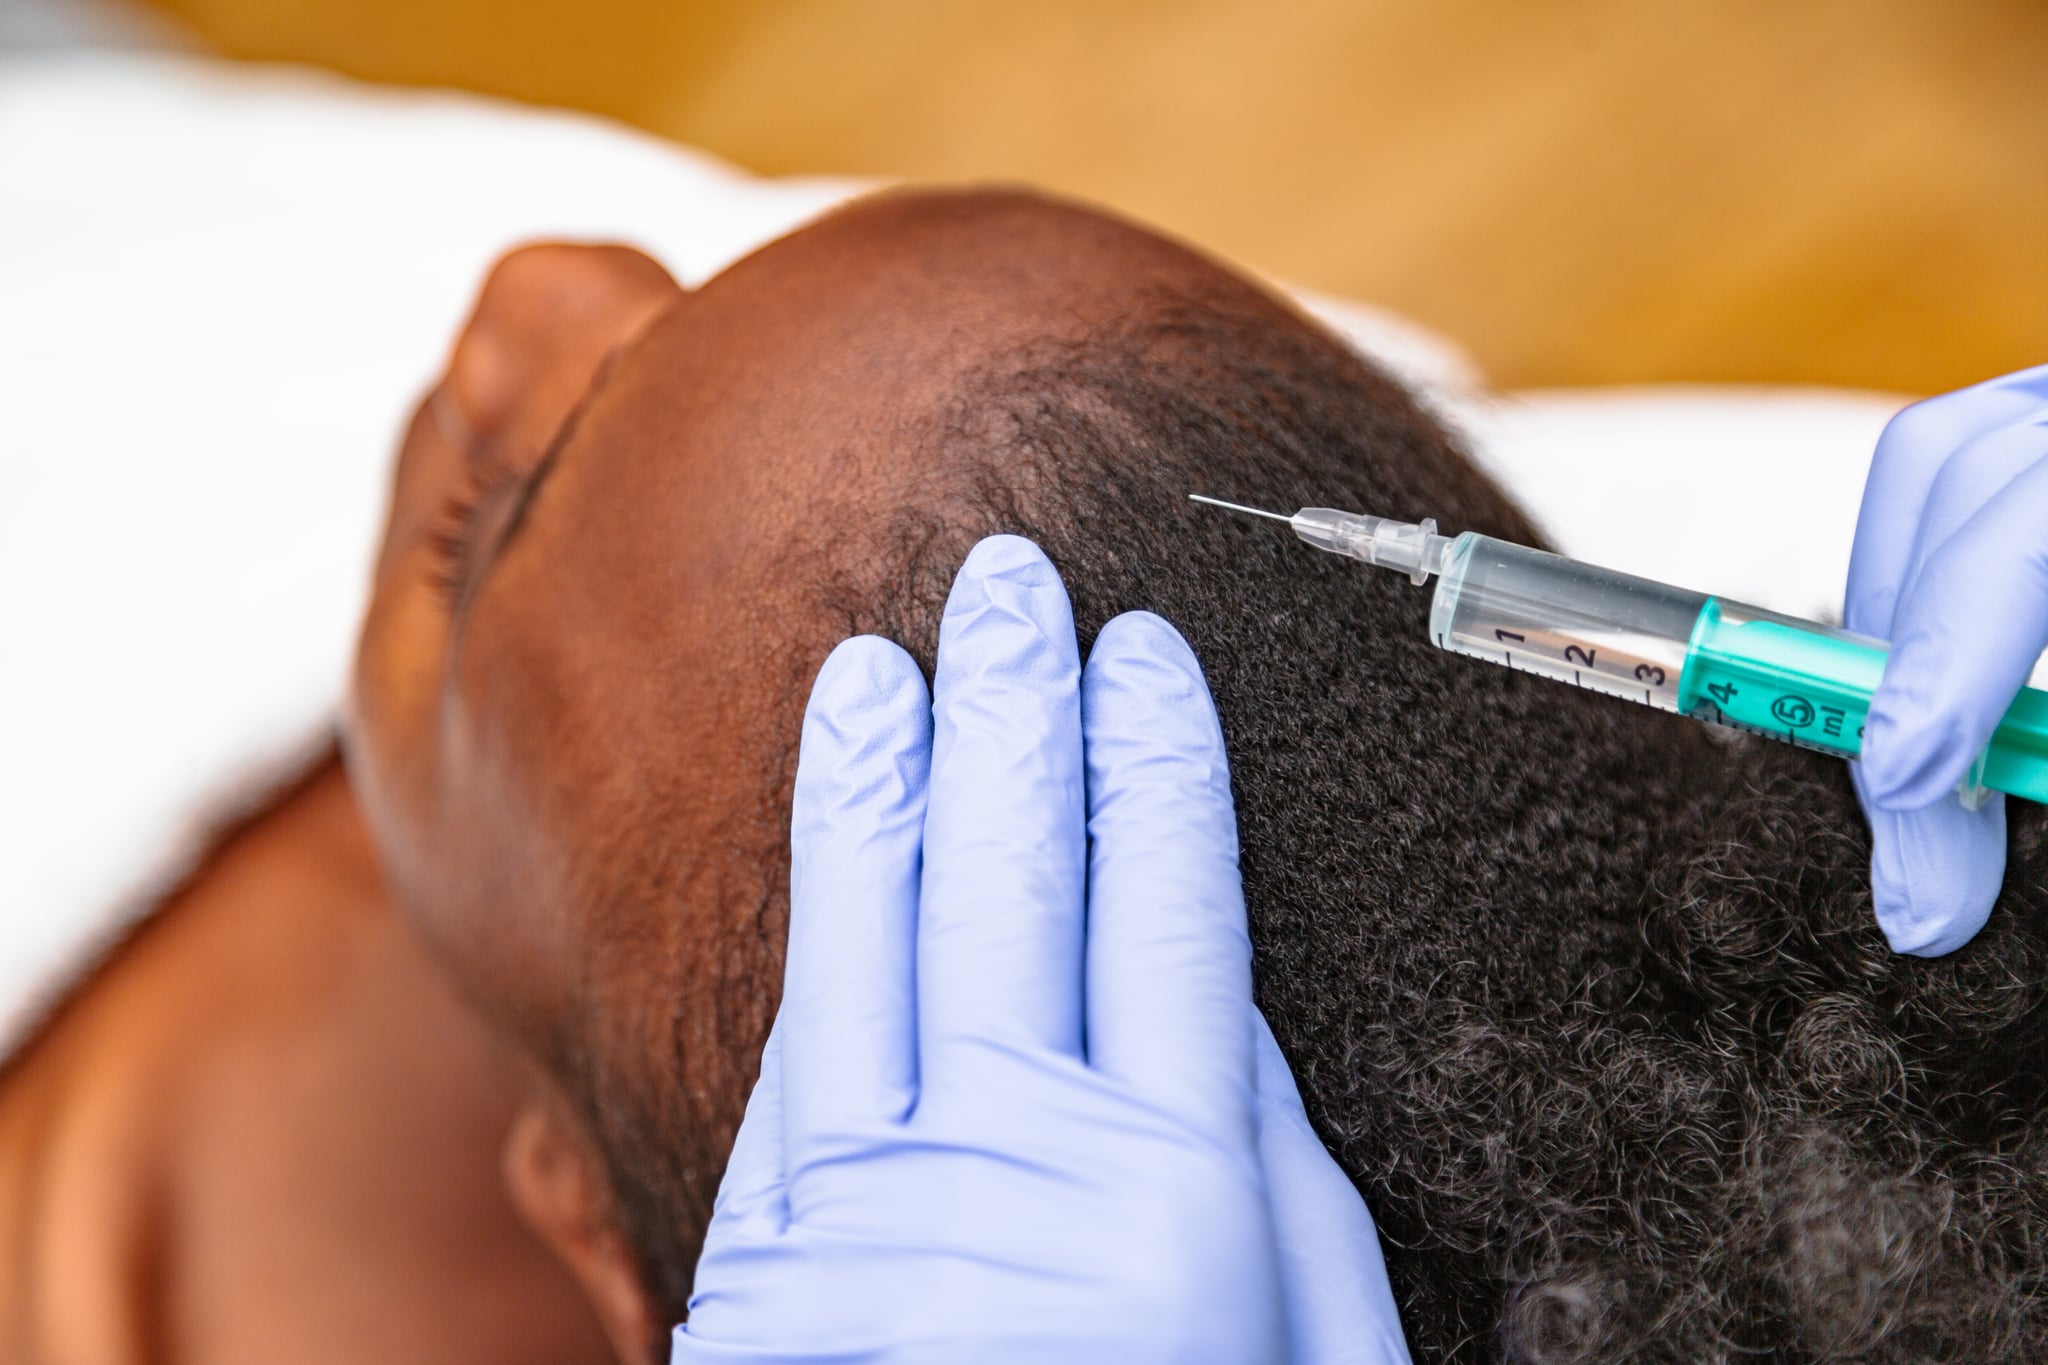 Women gets Botox injections around hairline to preserve her edges